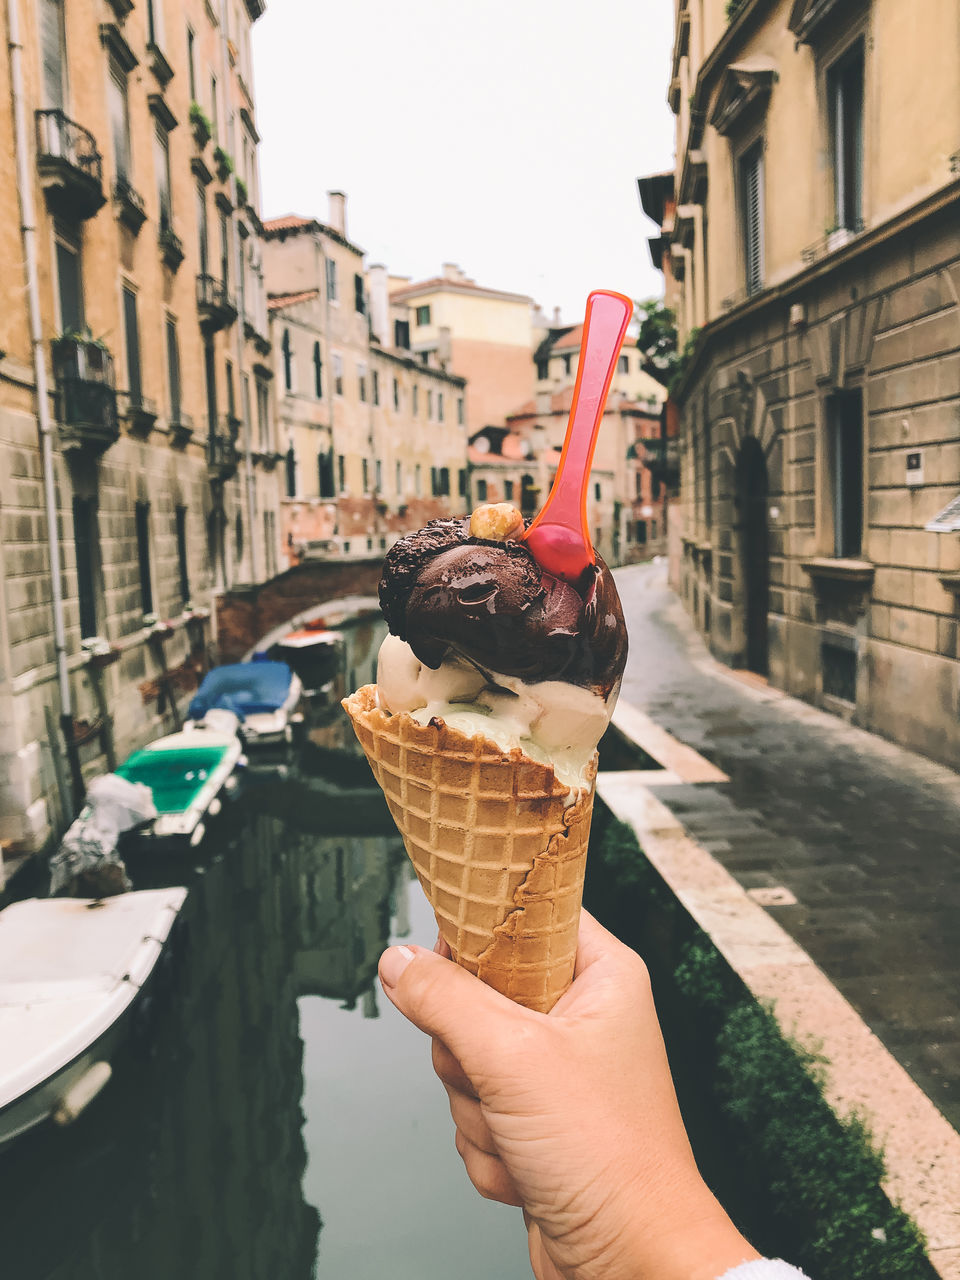 CROPPED IMAGE OF WOMAN HOLDING ICE CREAM CONE AGAINST CANAL